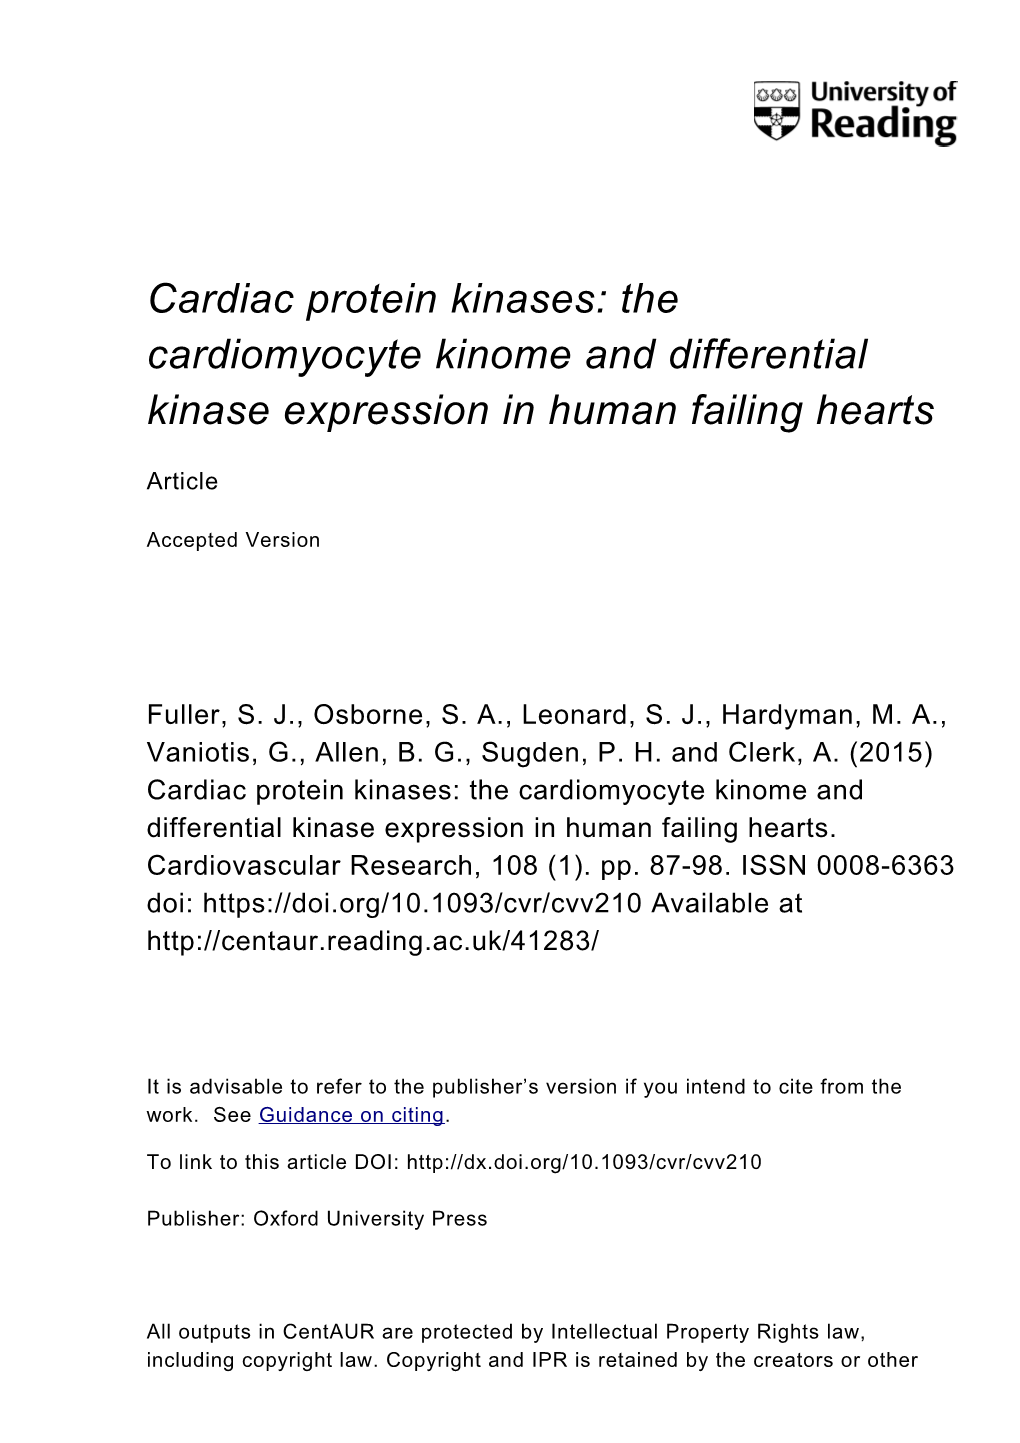 Cardiac Protein Kinases: the Cardiomyocyte Kinome and Differential Kinase Expression in Human Failing Hearts